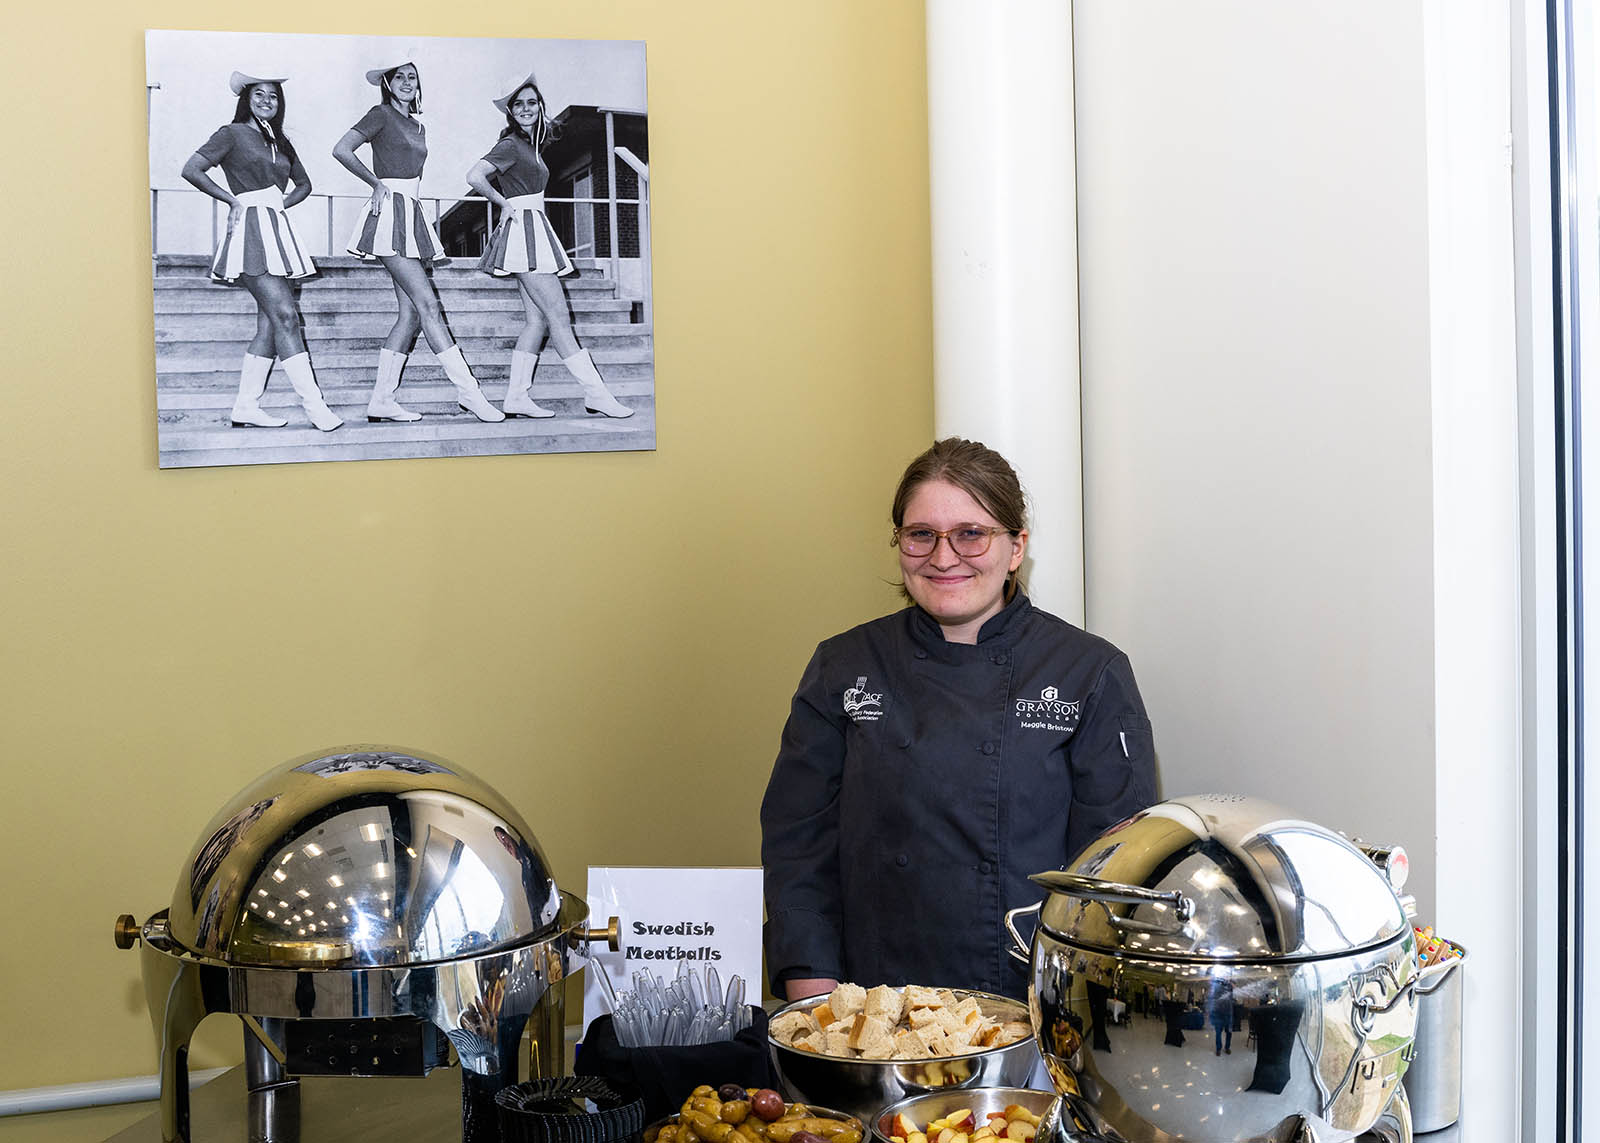 Event staff member smiling in front of Swedish Meatball serving station